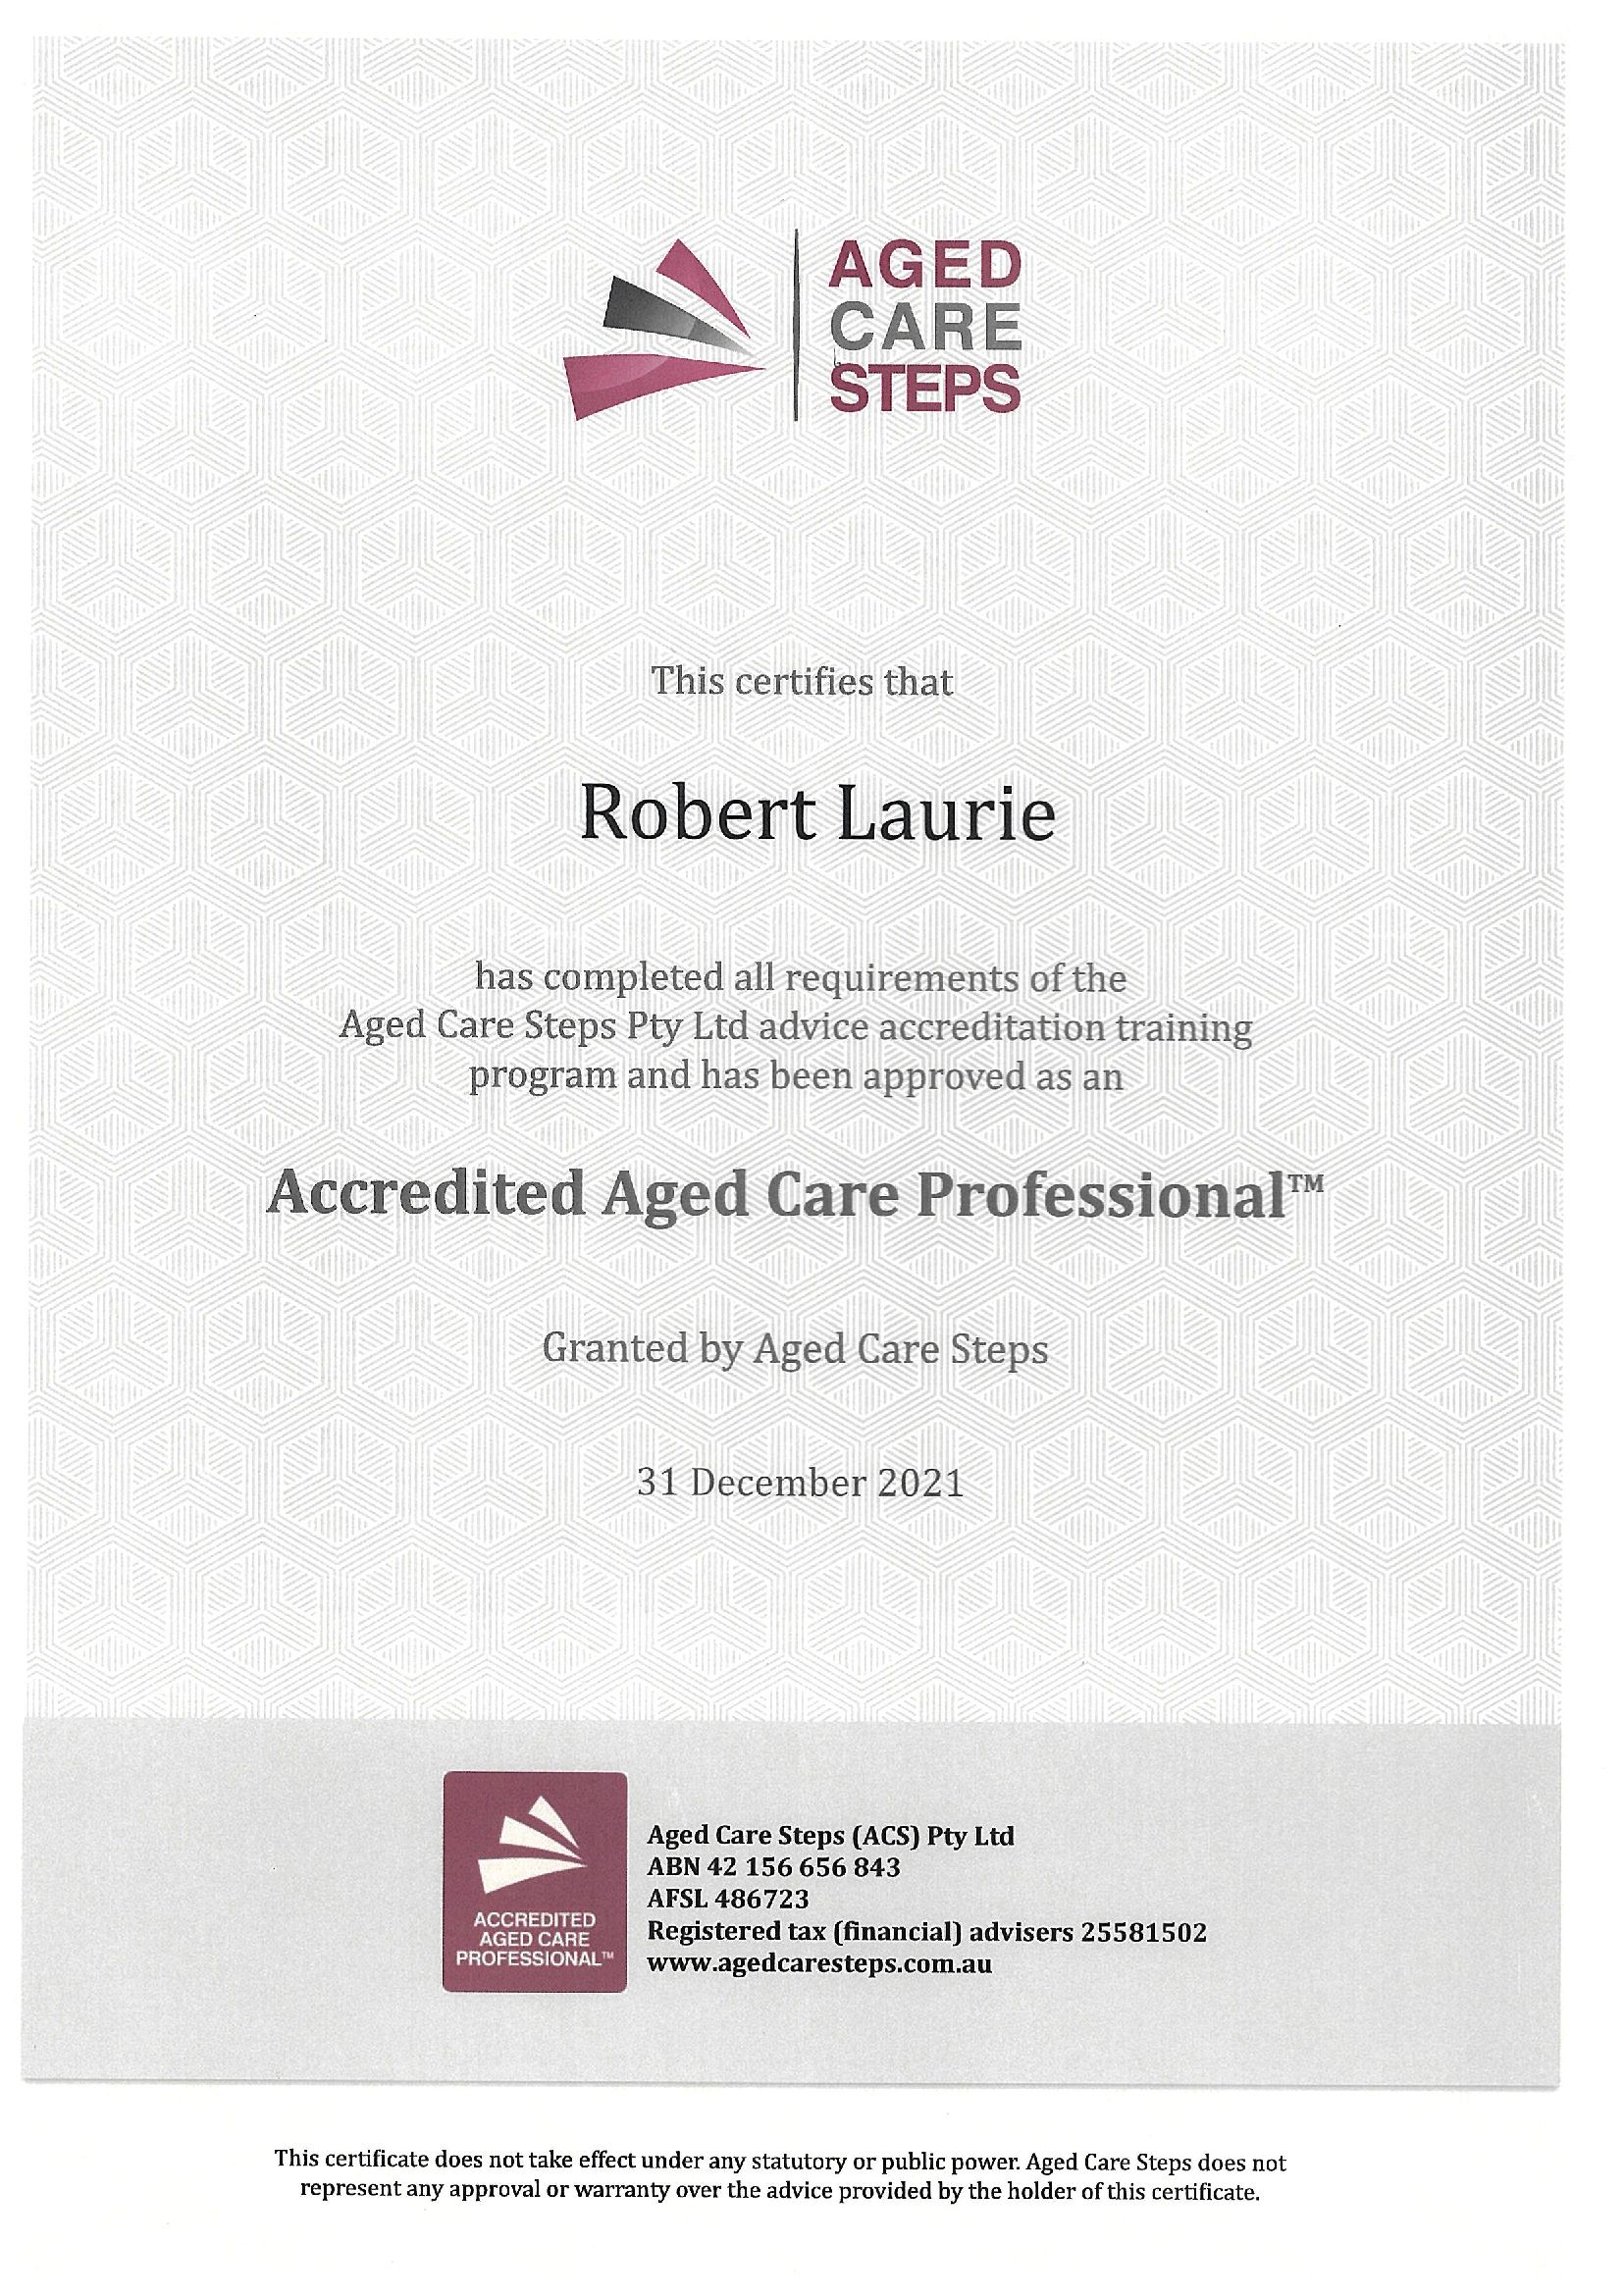 Accredited Aged Care Professional Certificate.